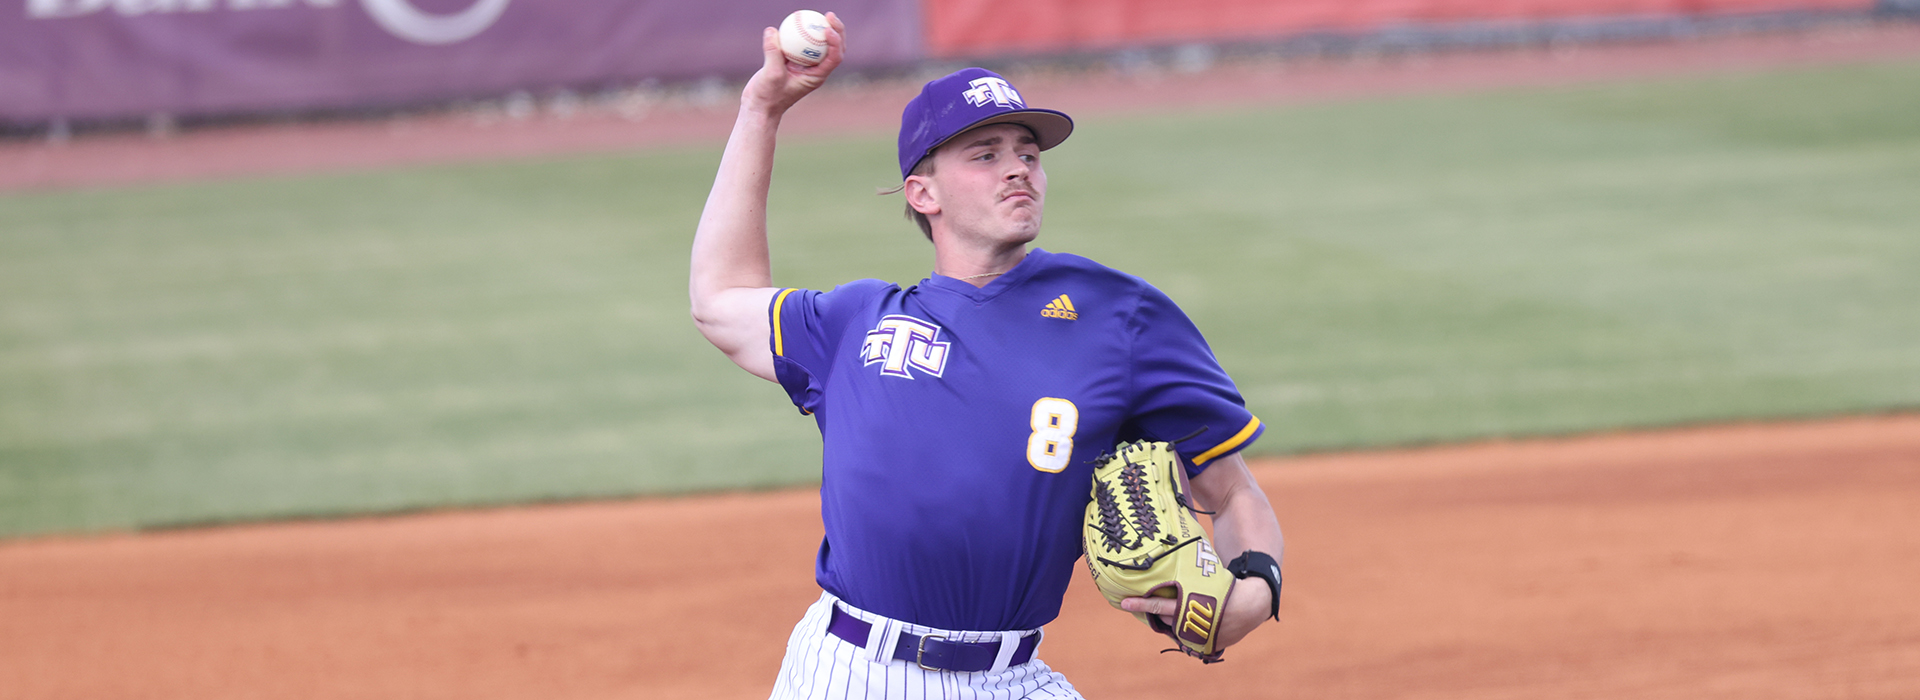 Golden Eagles trek north for OVC weekend series at Eastern Illinois